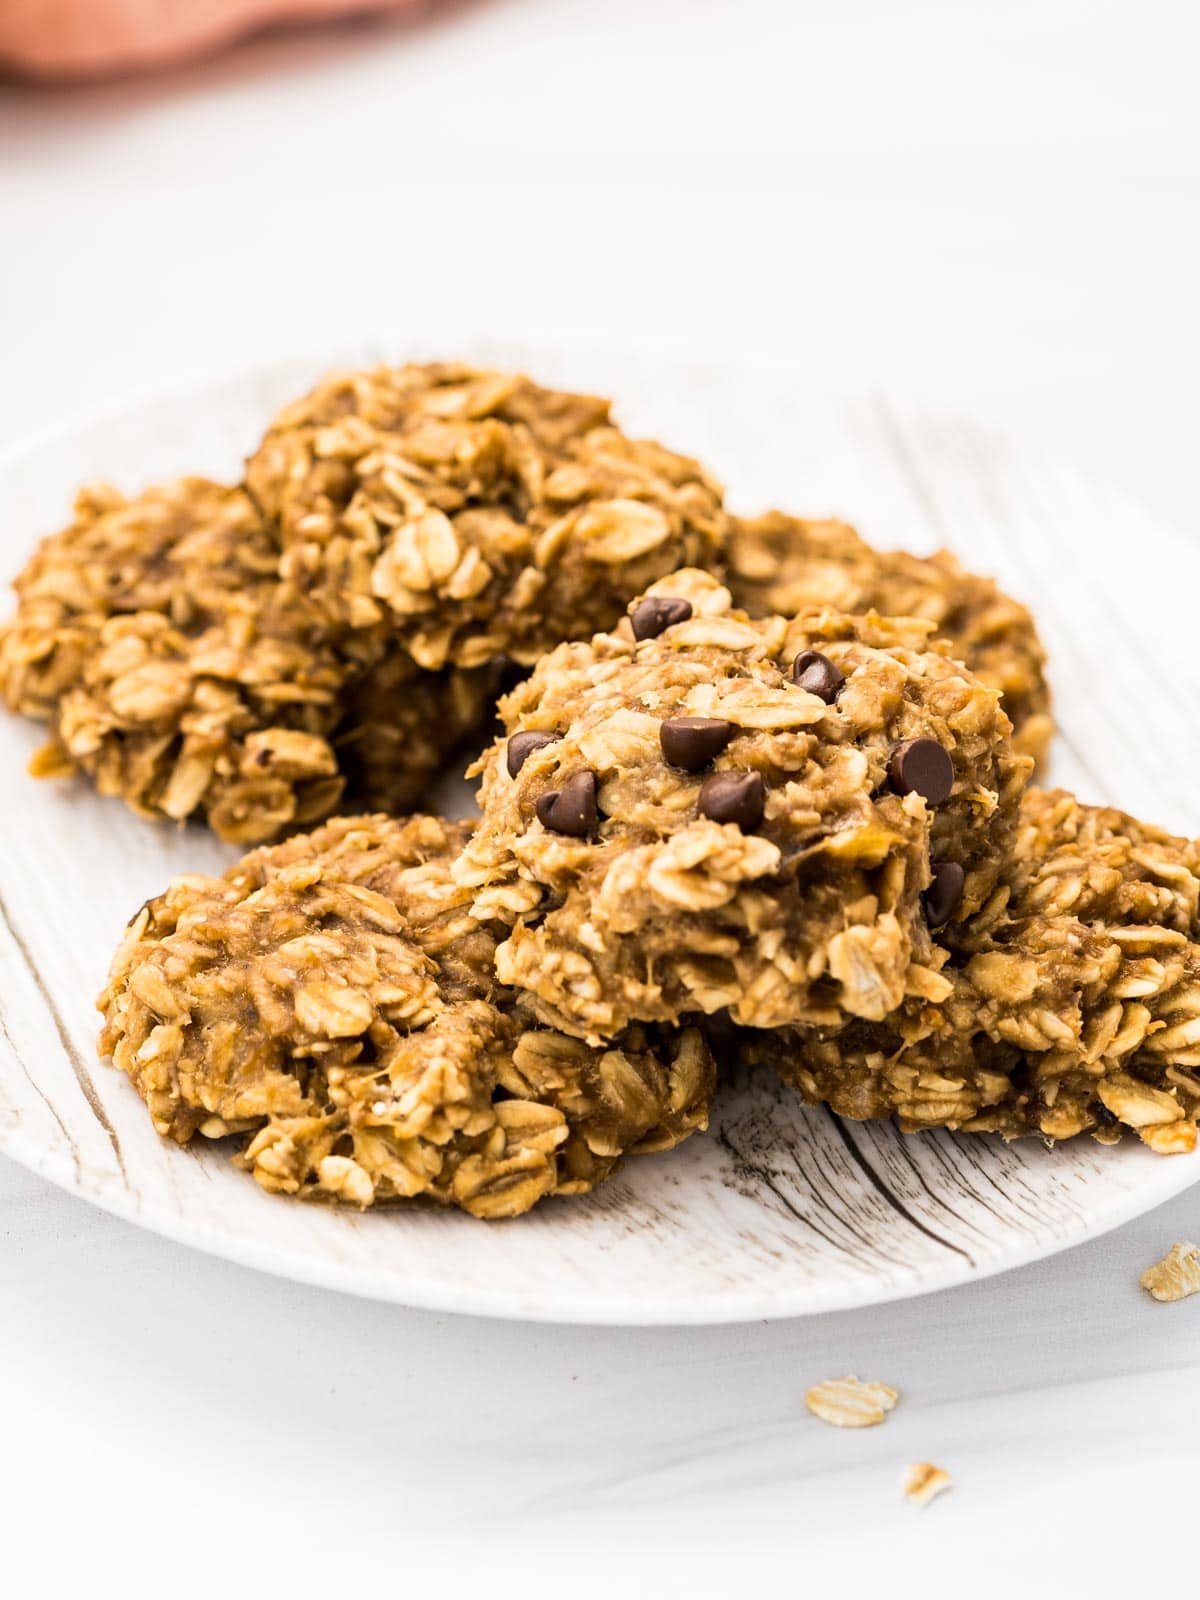 Six banana oatmeal breakfast cookies piled on a white plate with a pink napkin in the background.